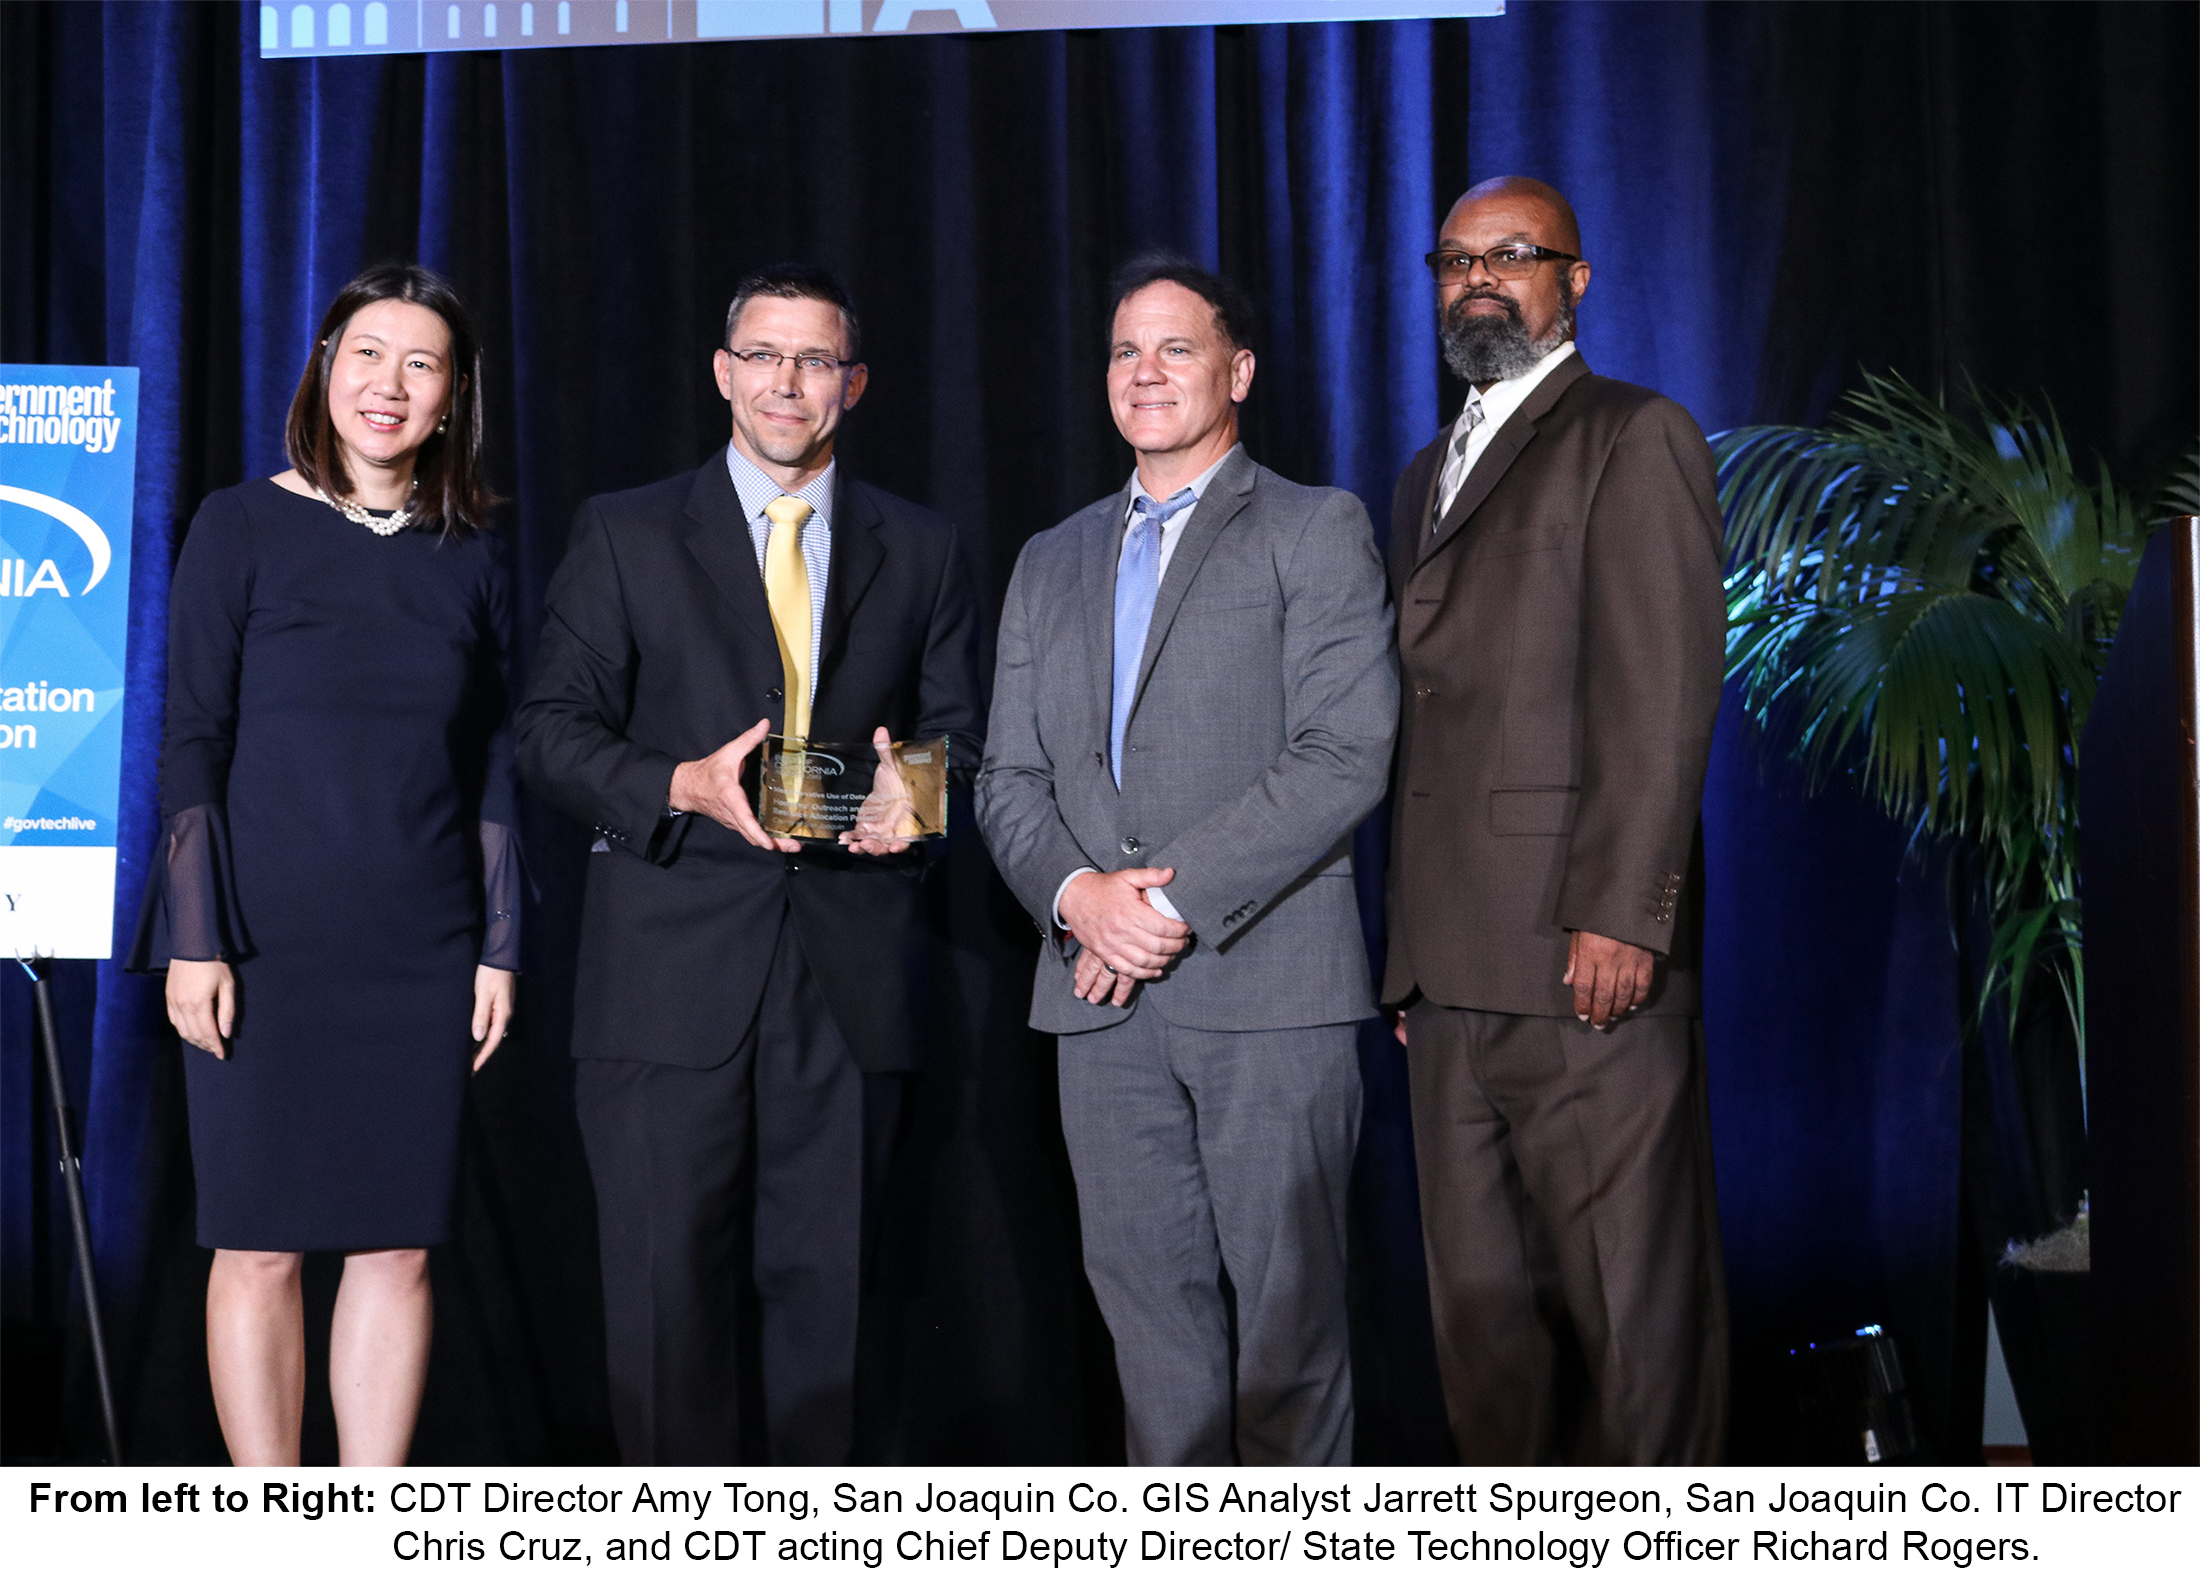 San Joaquin County GIS Analyst Jarrett Spurgeon and IT Director Chris Cruz receiving CA CIO Academy Award from CDT Director Amy Tong and CDT Acting Chief Deputy Director and State Technology Officer Richard Rogers 